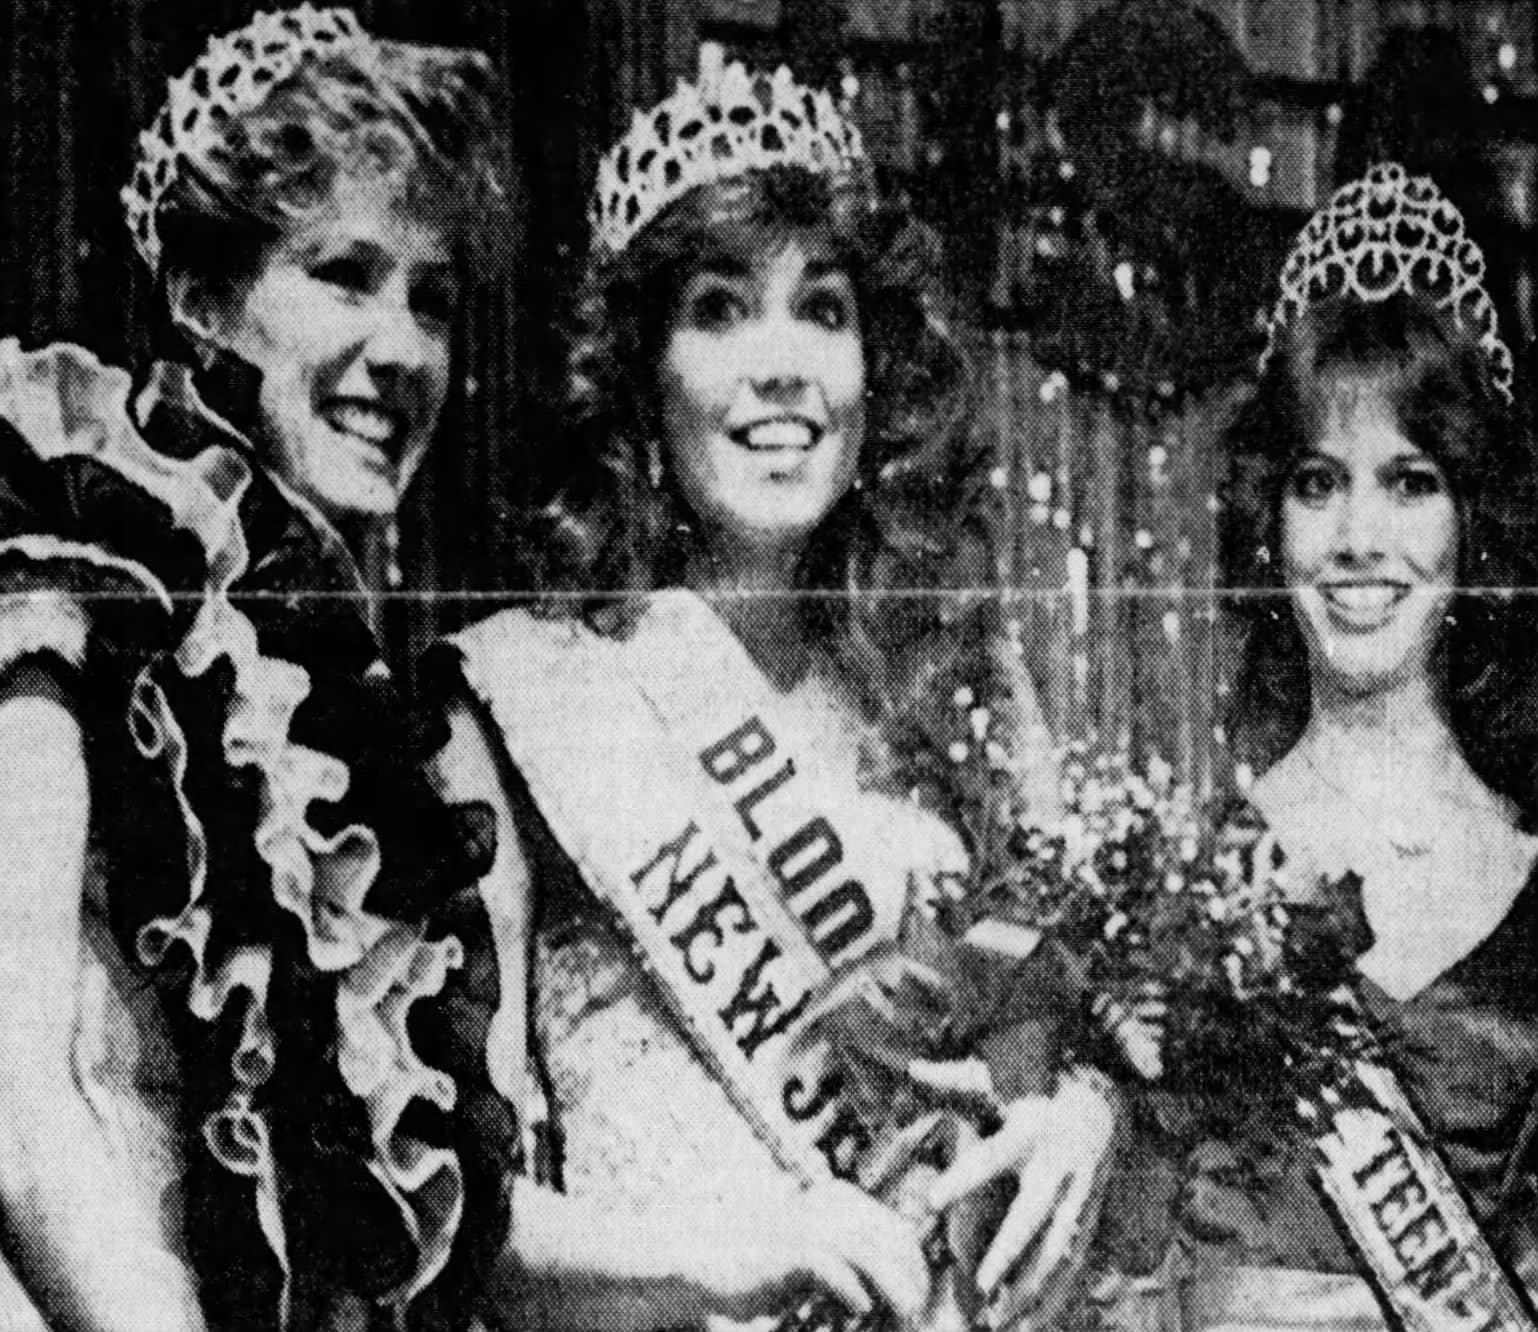 Ann Marie Brucato is crowned Miss New Jersey USA 1983